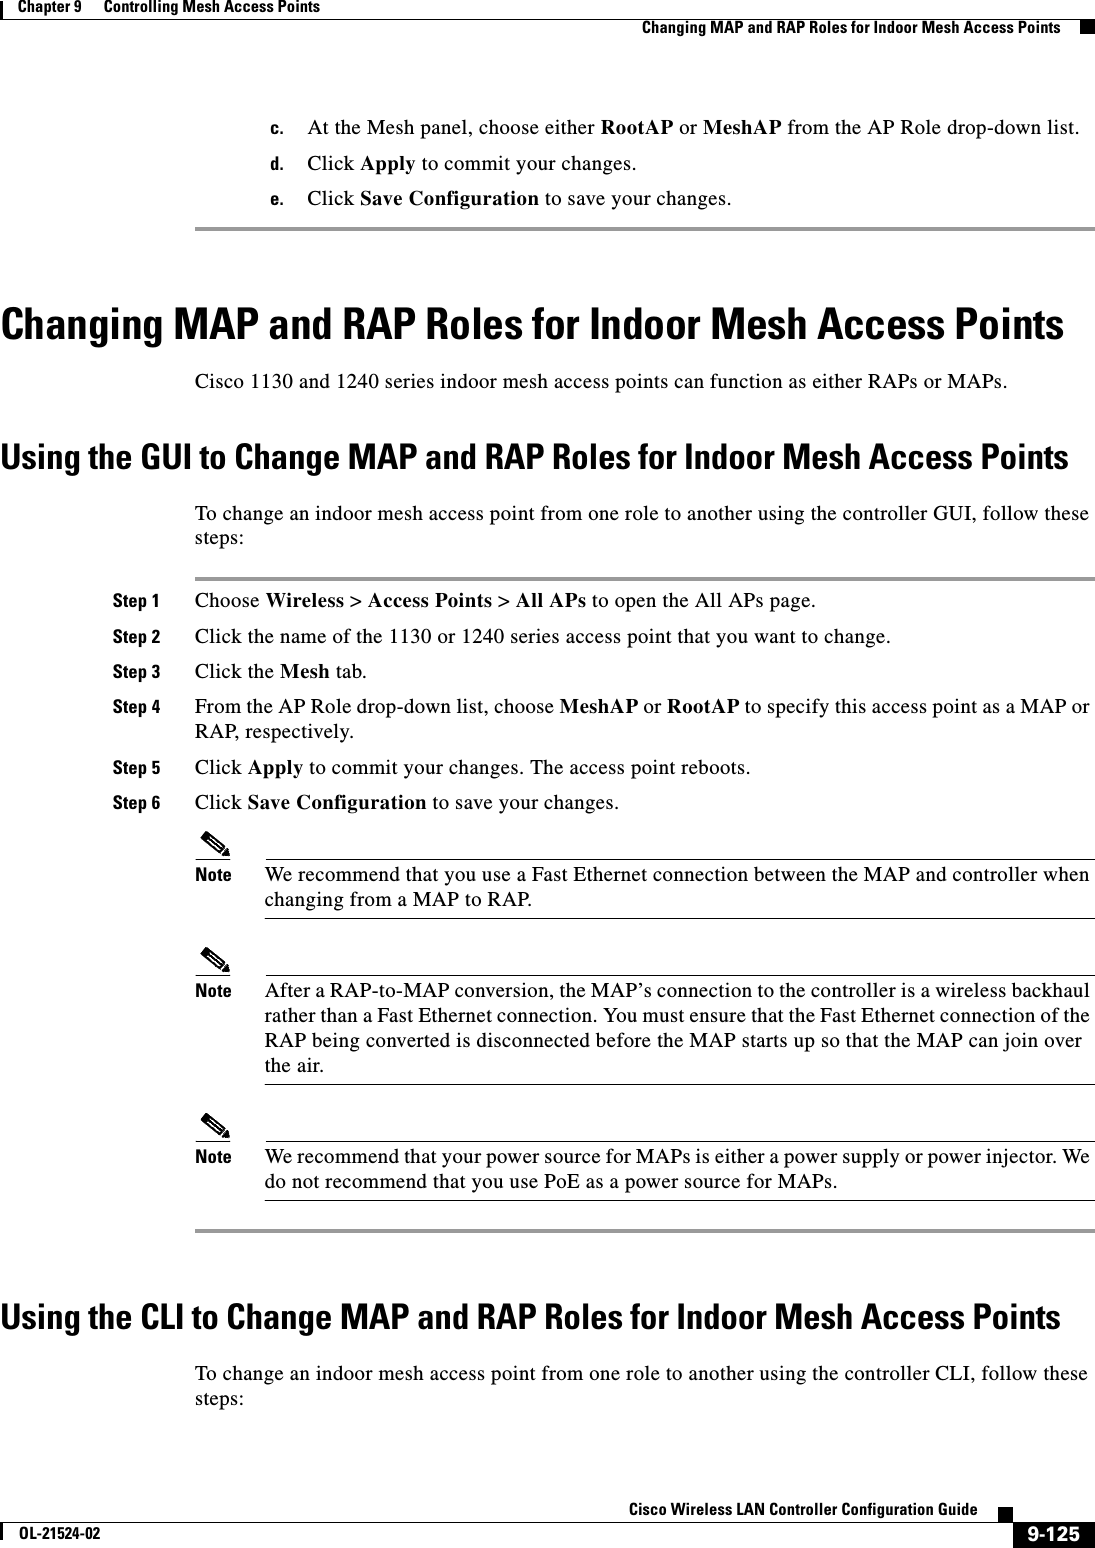  9-125Cisco Wireless LAN Controller Configuration GuideOL-21524-02Chapter 9      Controlling Mesh Access Points  Changing MAP and RAP Roles for Indoor Mesh Access Pointsc. At the Mesh panel, choose either RootAP or MeshAP from the AP Role drop-down list.d. Click Apply to commit your changes.e. Click Save Configuration to save your changes.Changing MAP and RAP Roles for Indoor Mesh Access PointsCisco 1130 and 1240 series indoor mesh access points can function as either RAPs or MAPs.Using the GUI to Change MAP and RAP Roles for Indoor Mesh Access PointsTo change an indoor mesh access point from one role to another using the controller GUI, follow these steps:Step 1 Choose Wireless &gt; Access Points &gt; All APs to open the All APs page.Step 2 Click the name of the 1130 or 1240 series access point that you want to change.Step 3 Click the Mesh tab.Step 4 From the AP Role drop-down list, choose MeshAP or RootAP to specify this access point as a MAP or RAP, respectively.Step 5 Click Apply to commit your changes. The access point reboots.Step 6 Click Save Configuration to save your changes.Note We recommend that you use a Fast Ethernet connection between the MAP and controller when changing from a MAP to RAP.Note After a RAP-to-MAP conversion, the MAP’s connection to the controller is a wireless backhaul rather than a Fast Ethernet connection. You must ensure that the Fast Ethernet connection of the RAP being converted is disconnected before the MAP starts up so that the MAP can join over the air.Note We recommend that your power source for MAPs is either a power supply or power injector. We do not recommend that you use PoE as a power source for MAPs.Using the CLI to Change MAP and RAP Roles for Indoor Mesh Access PointsTo change an indoor mesh access point from one role to another using the controller CLI, follow these steps: